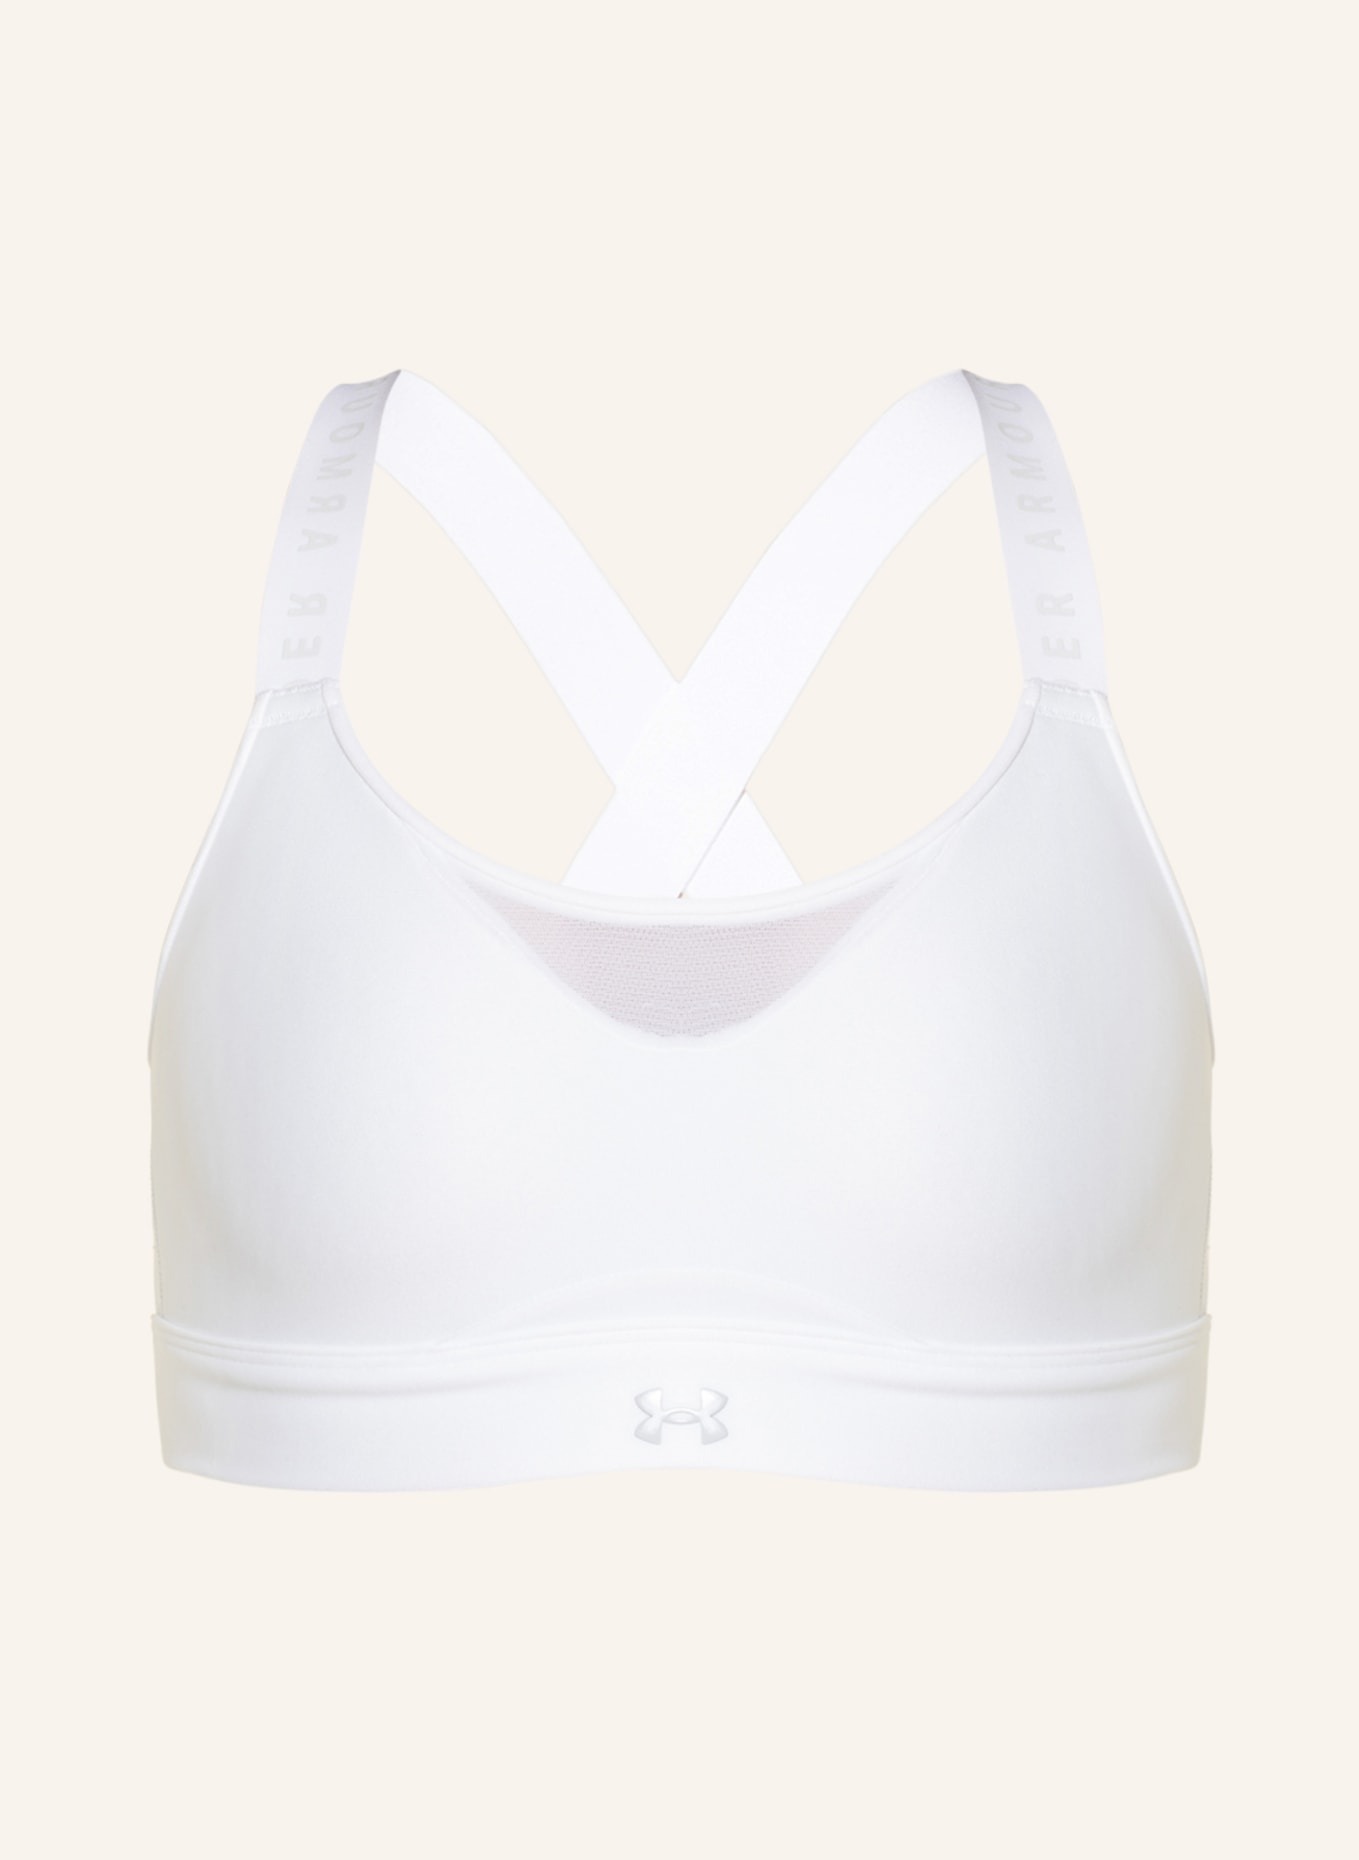 UNDER ARMOUR Sports bra INFINITY with mesh, Color: WHITE (Image 1)